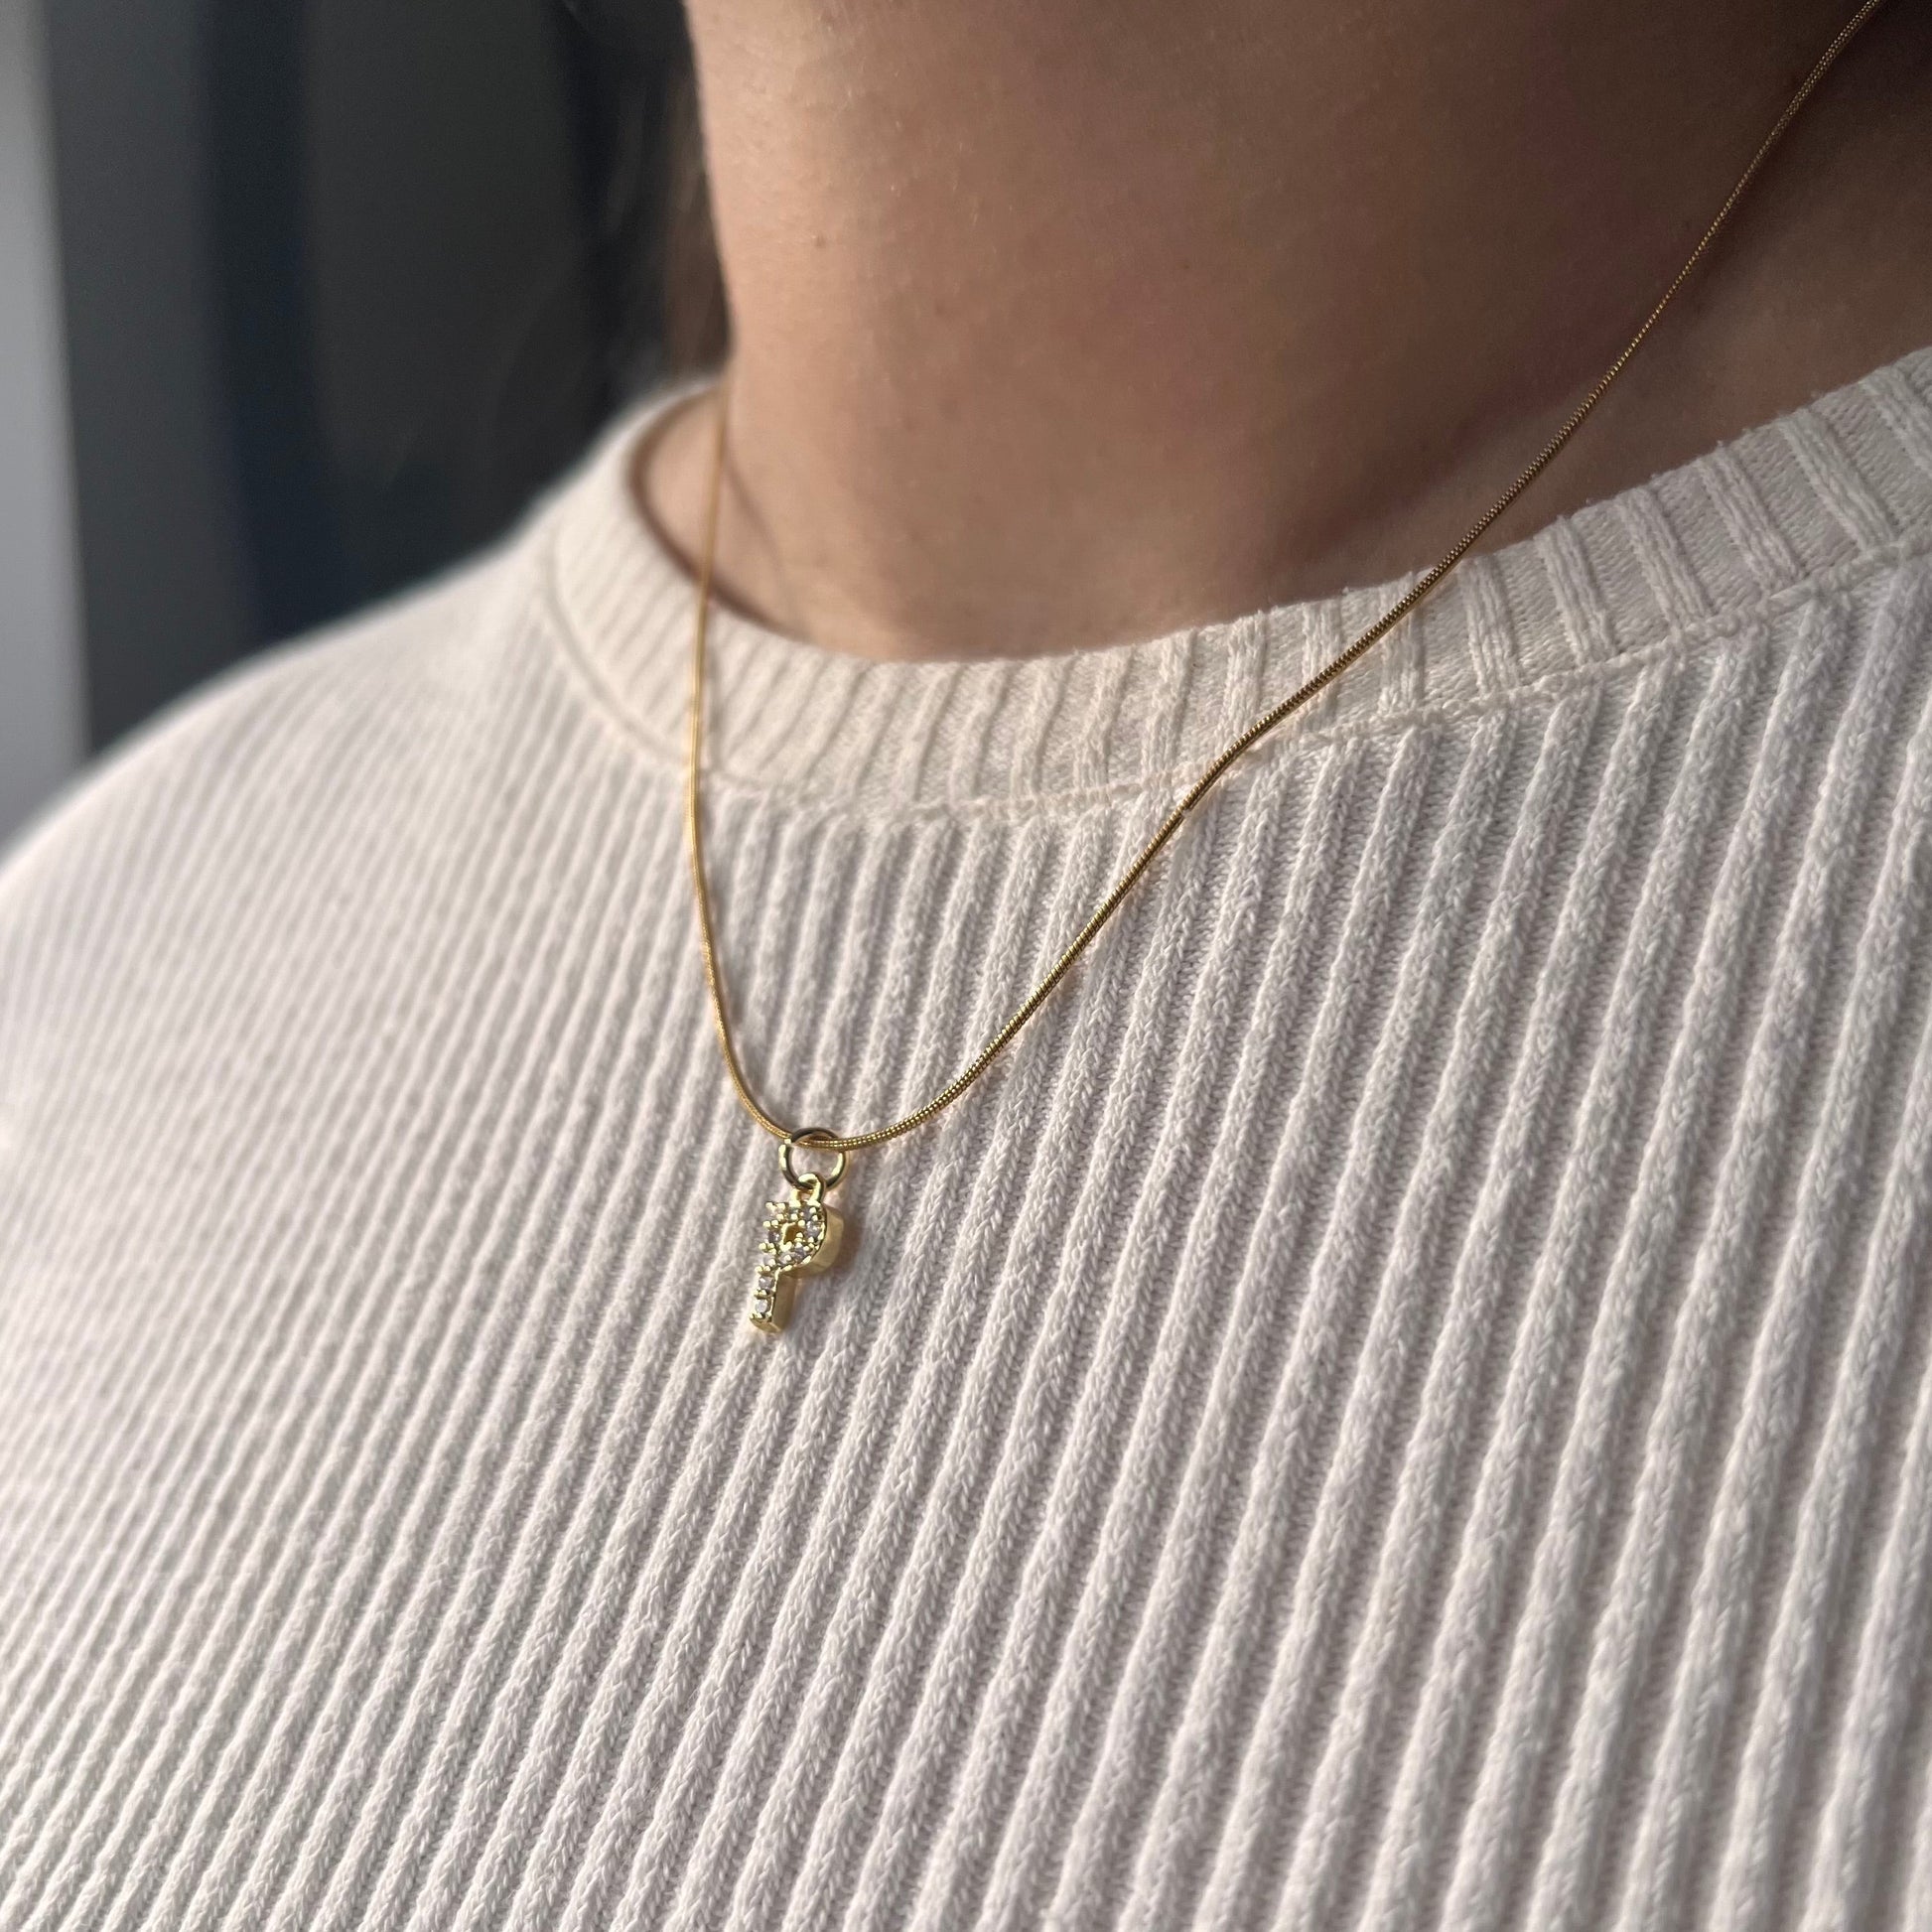 Get trendy with Initial Pendant Abbey Necklace -  available at Alma Ireland. Grab yours for €22.99 today!